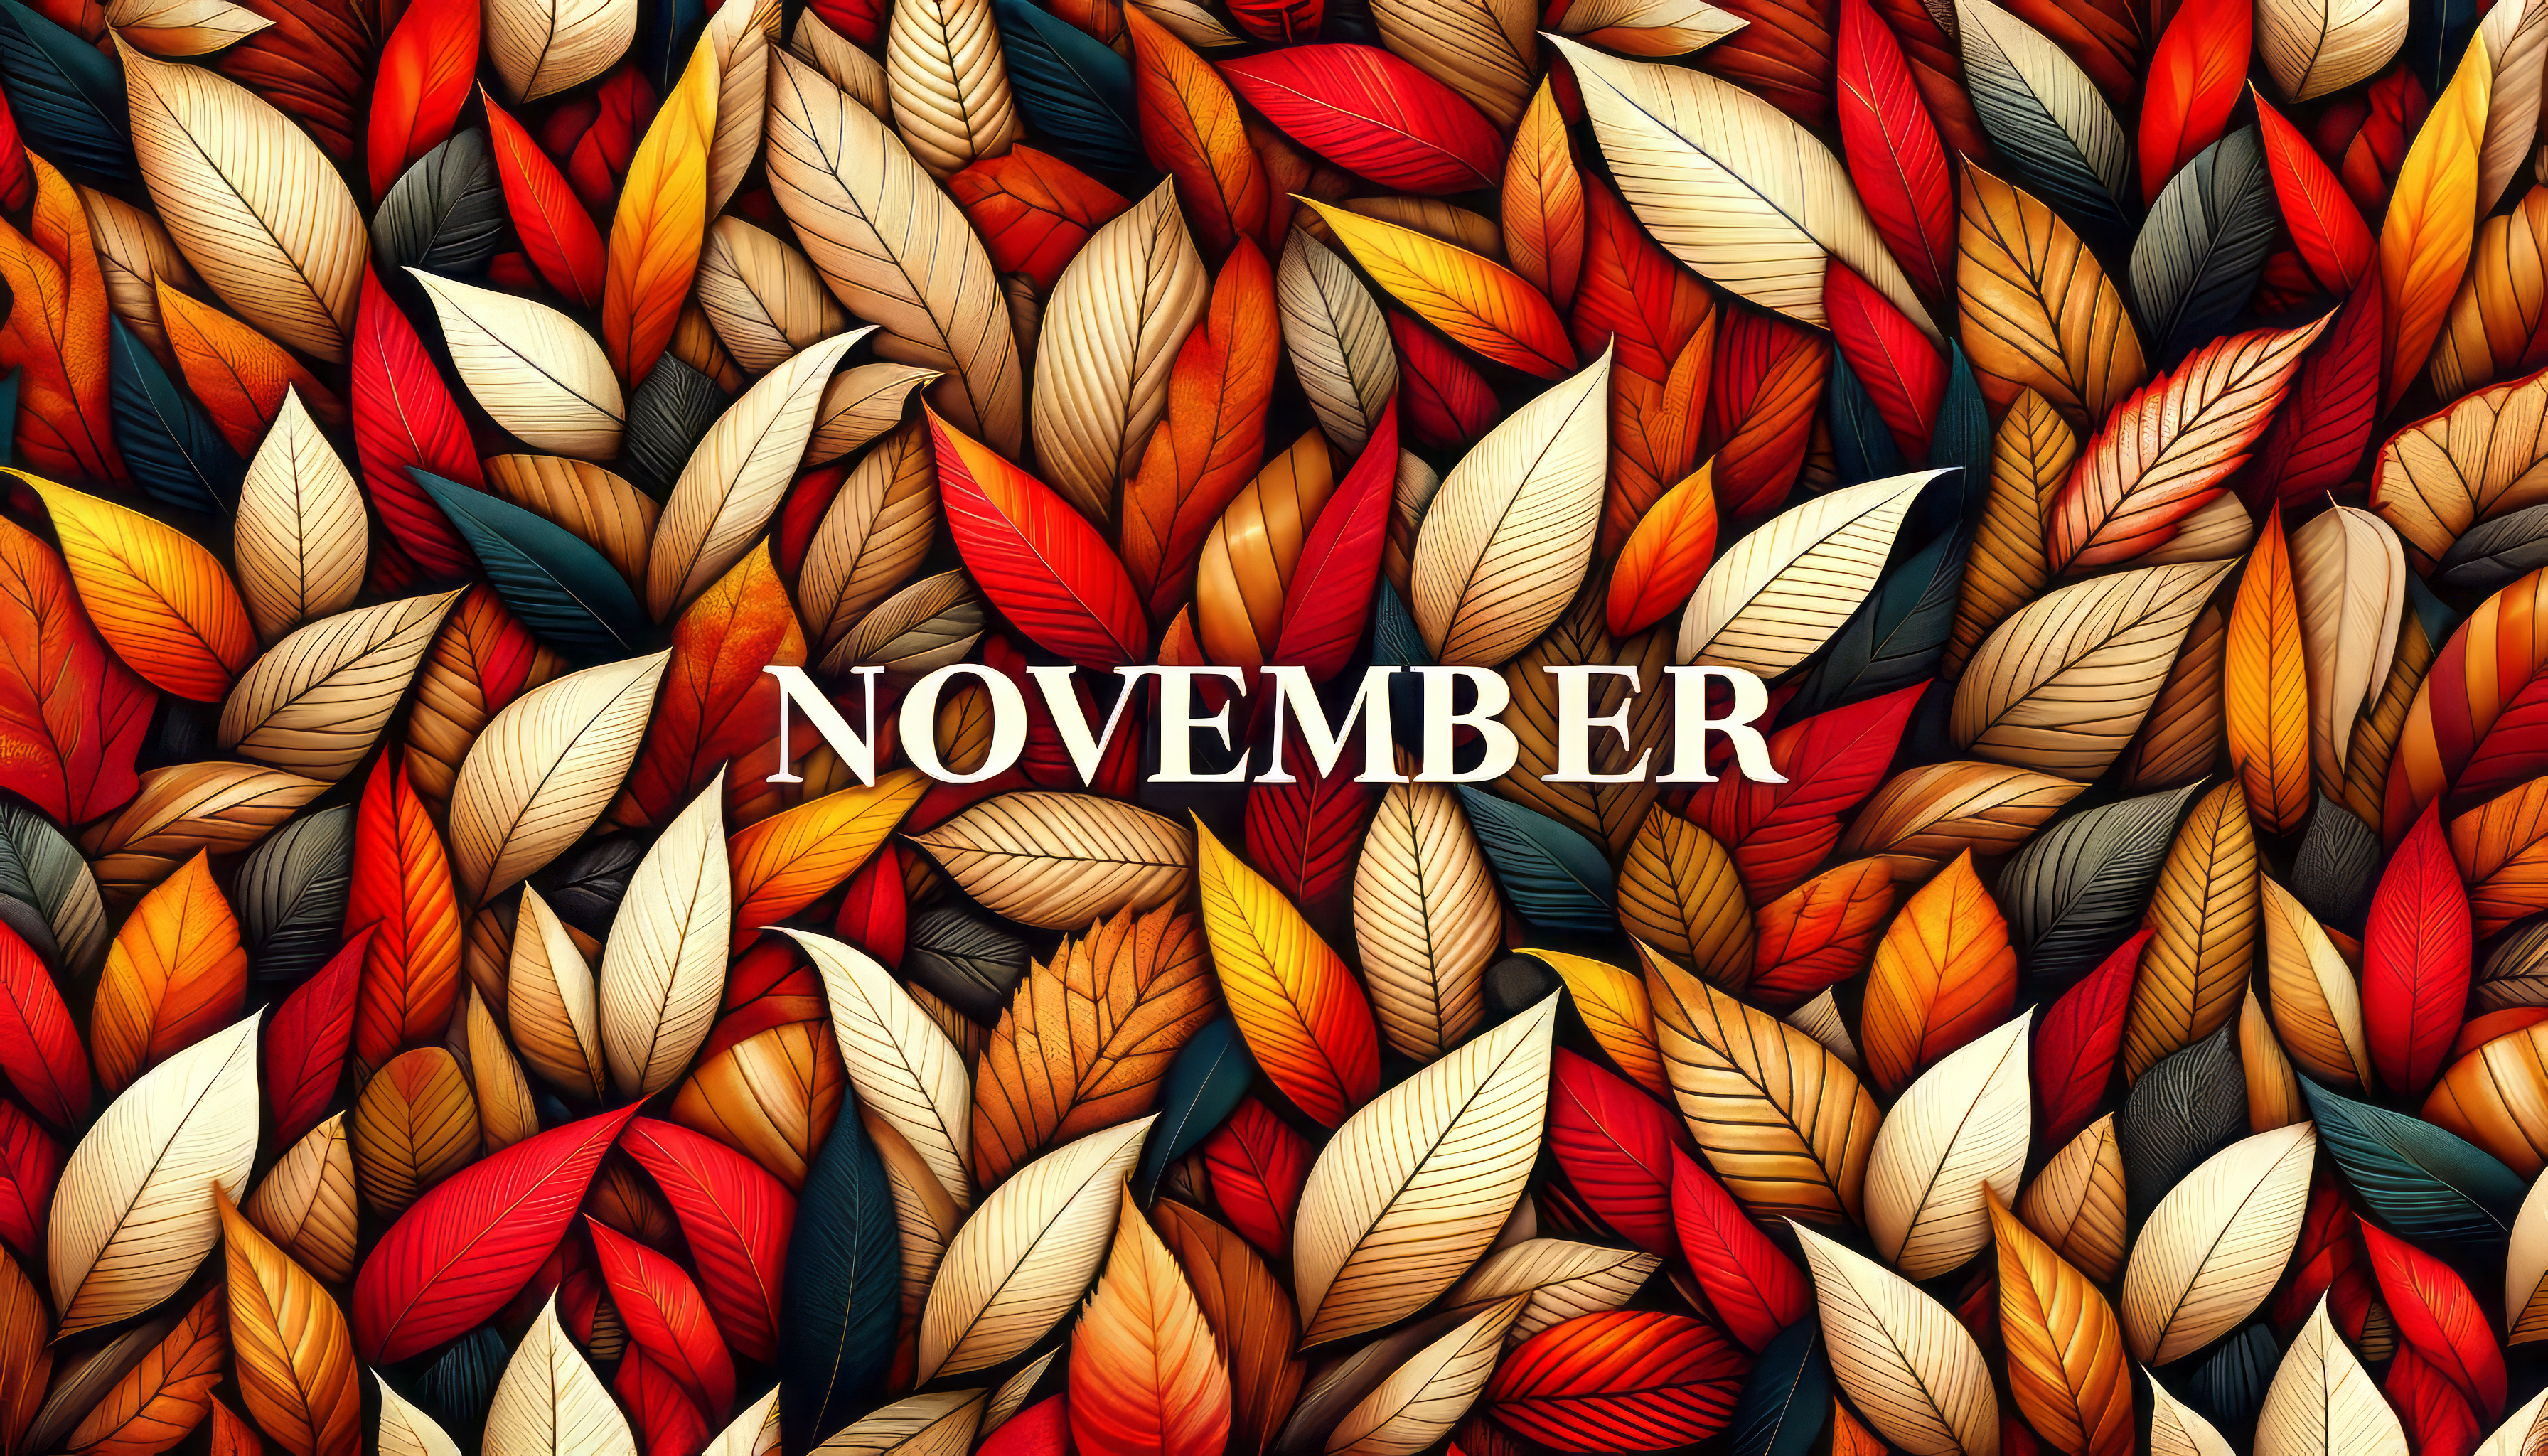 Colorful autumn leaves pattern with the word 'November' for HD desktop wallpaper background.